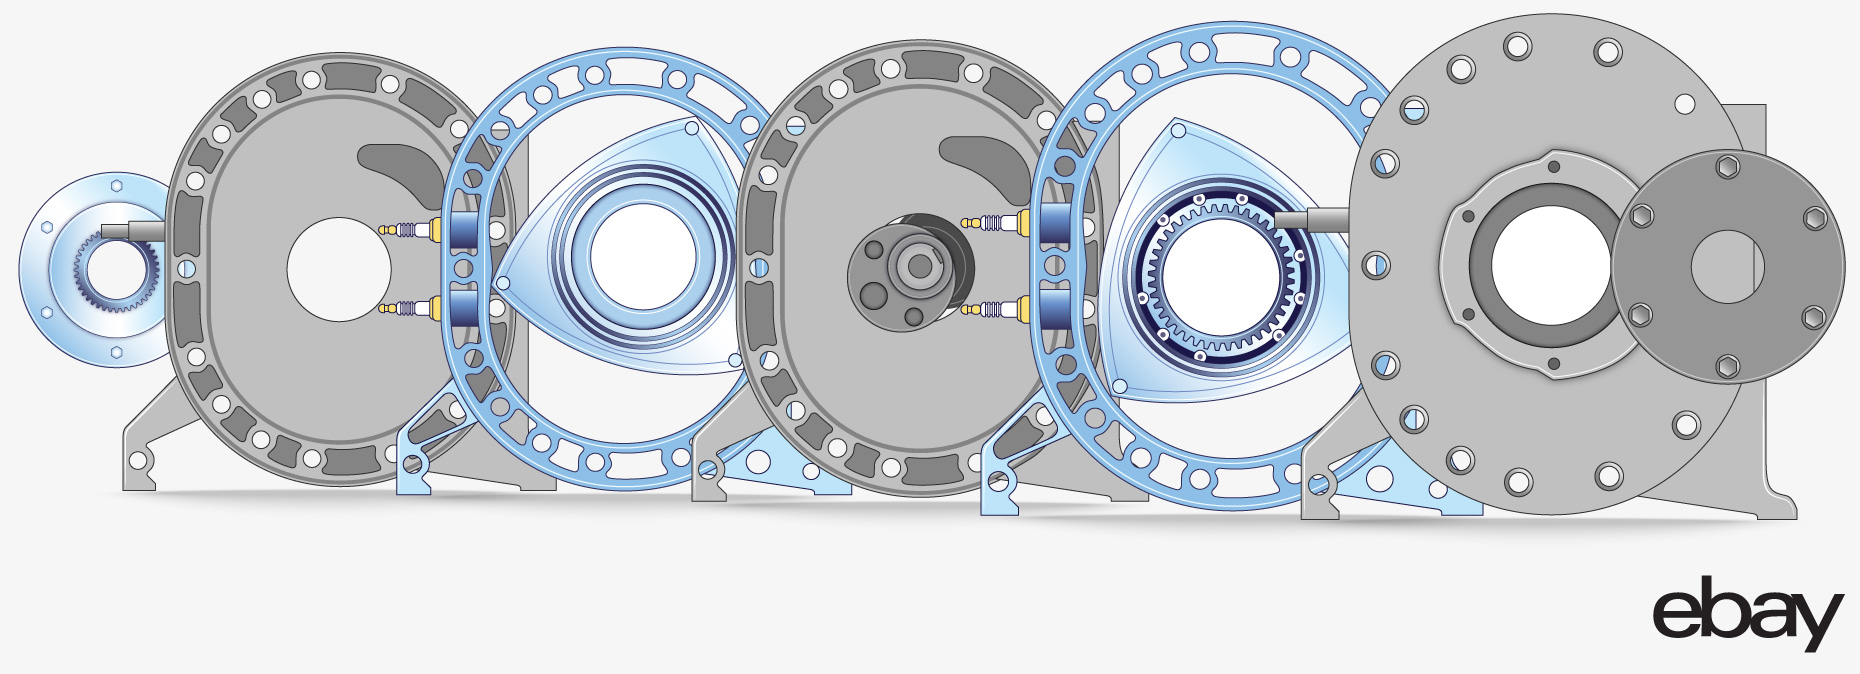 Rotary engines are assembled like sandwiches. This is an exploded view of a two-rotor engine.